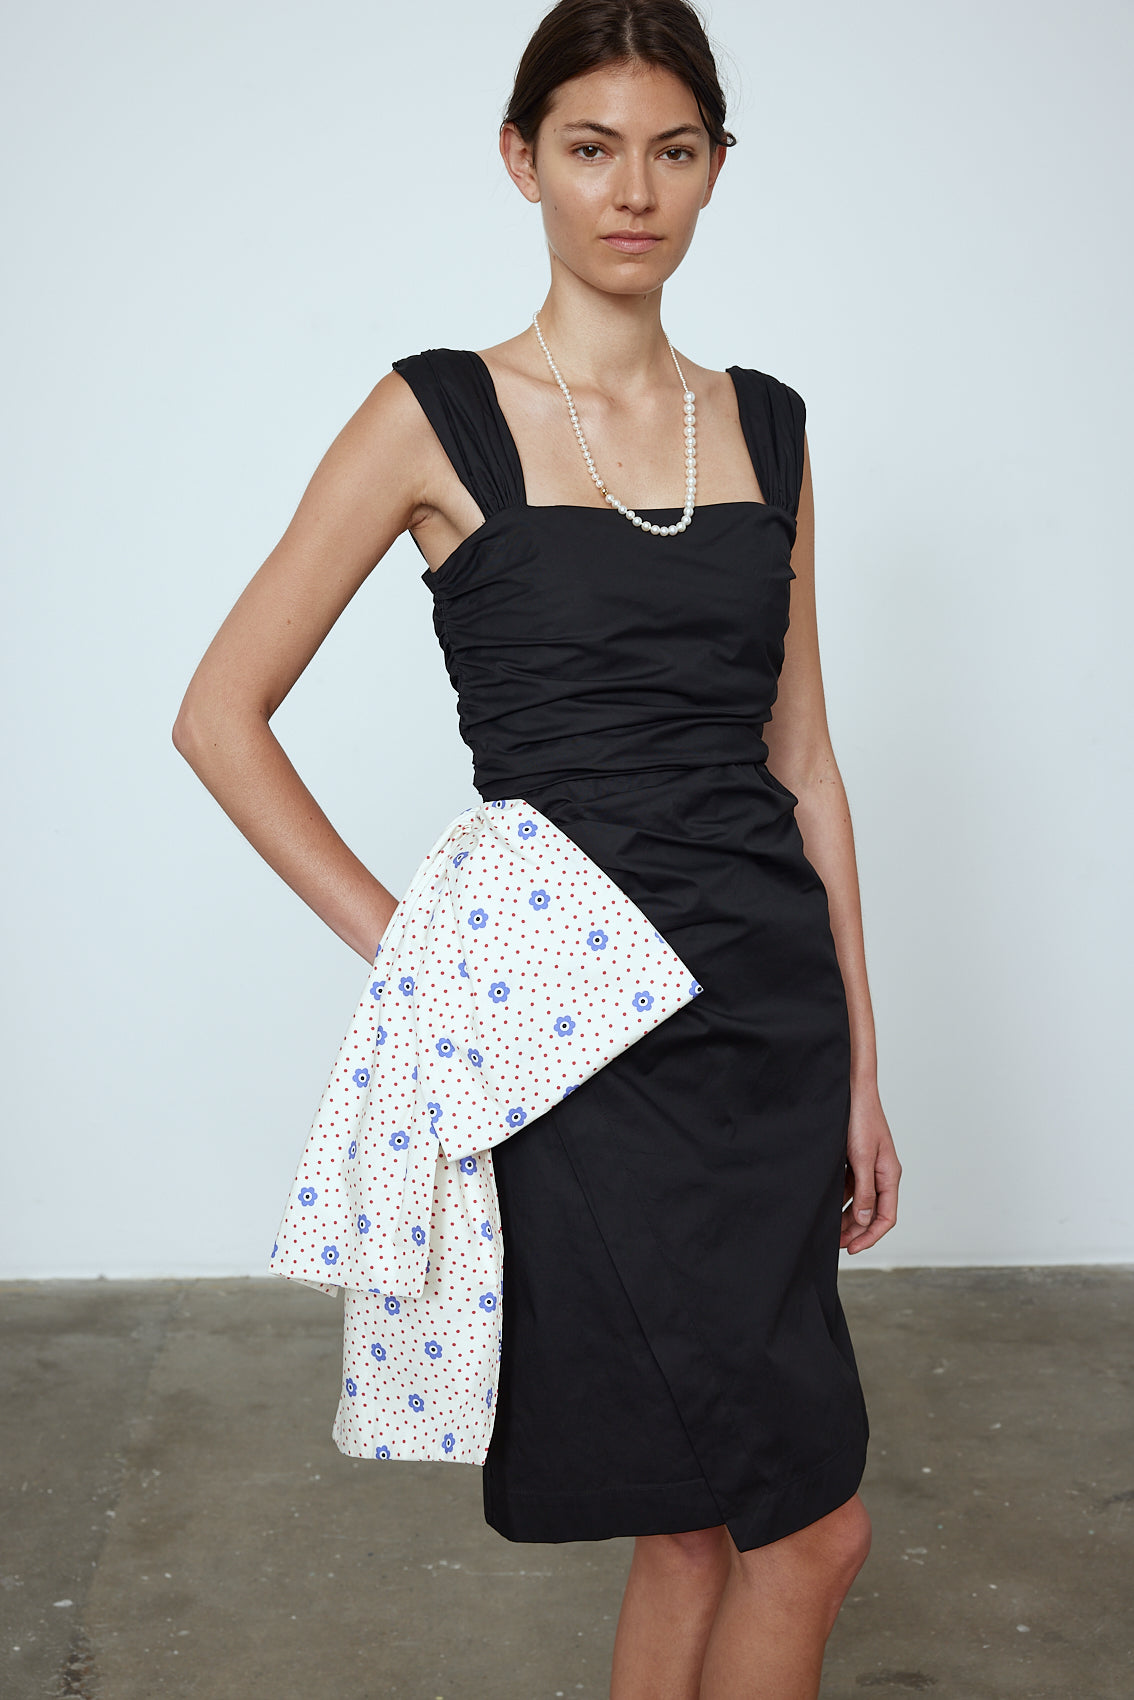 The Sophie Dress is a classic black poplin dress with a big silk bow detail on the side in our blue daisy print. The Dress features wide straps, a slit, and a fitted waist.   Material: 100% cotton. Bow: 100 % silk.  The model is 179cm (5'10") and wears size S.